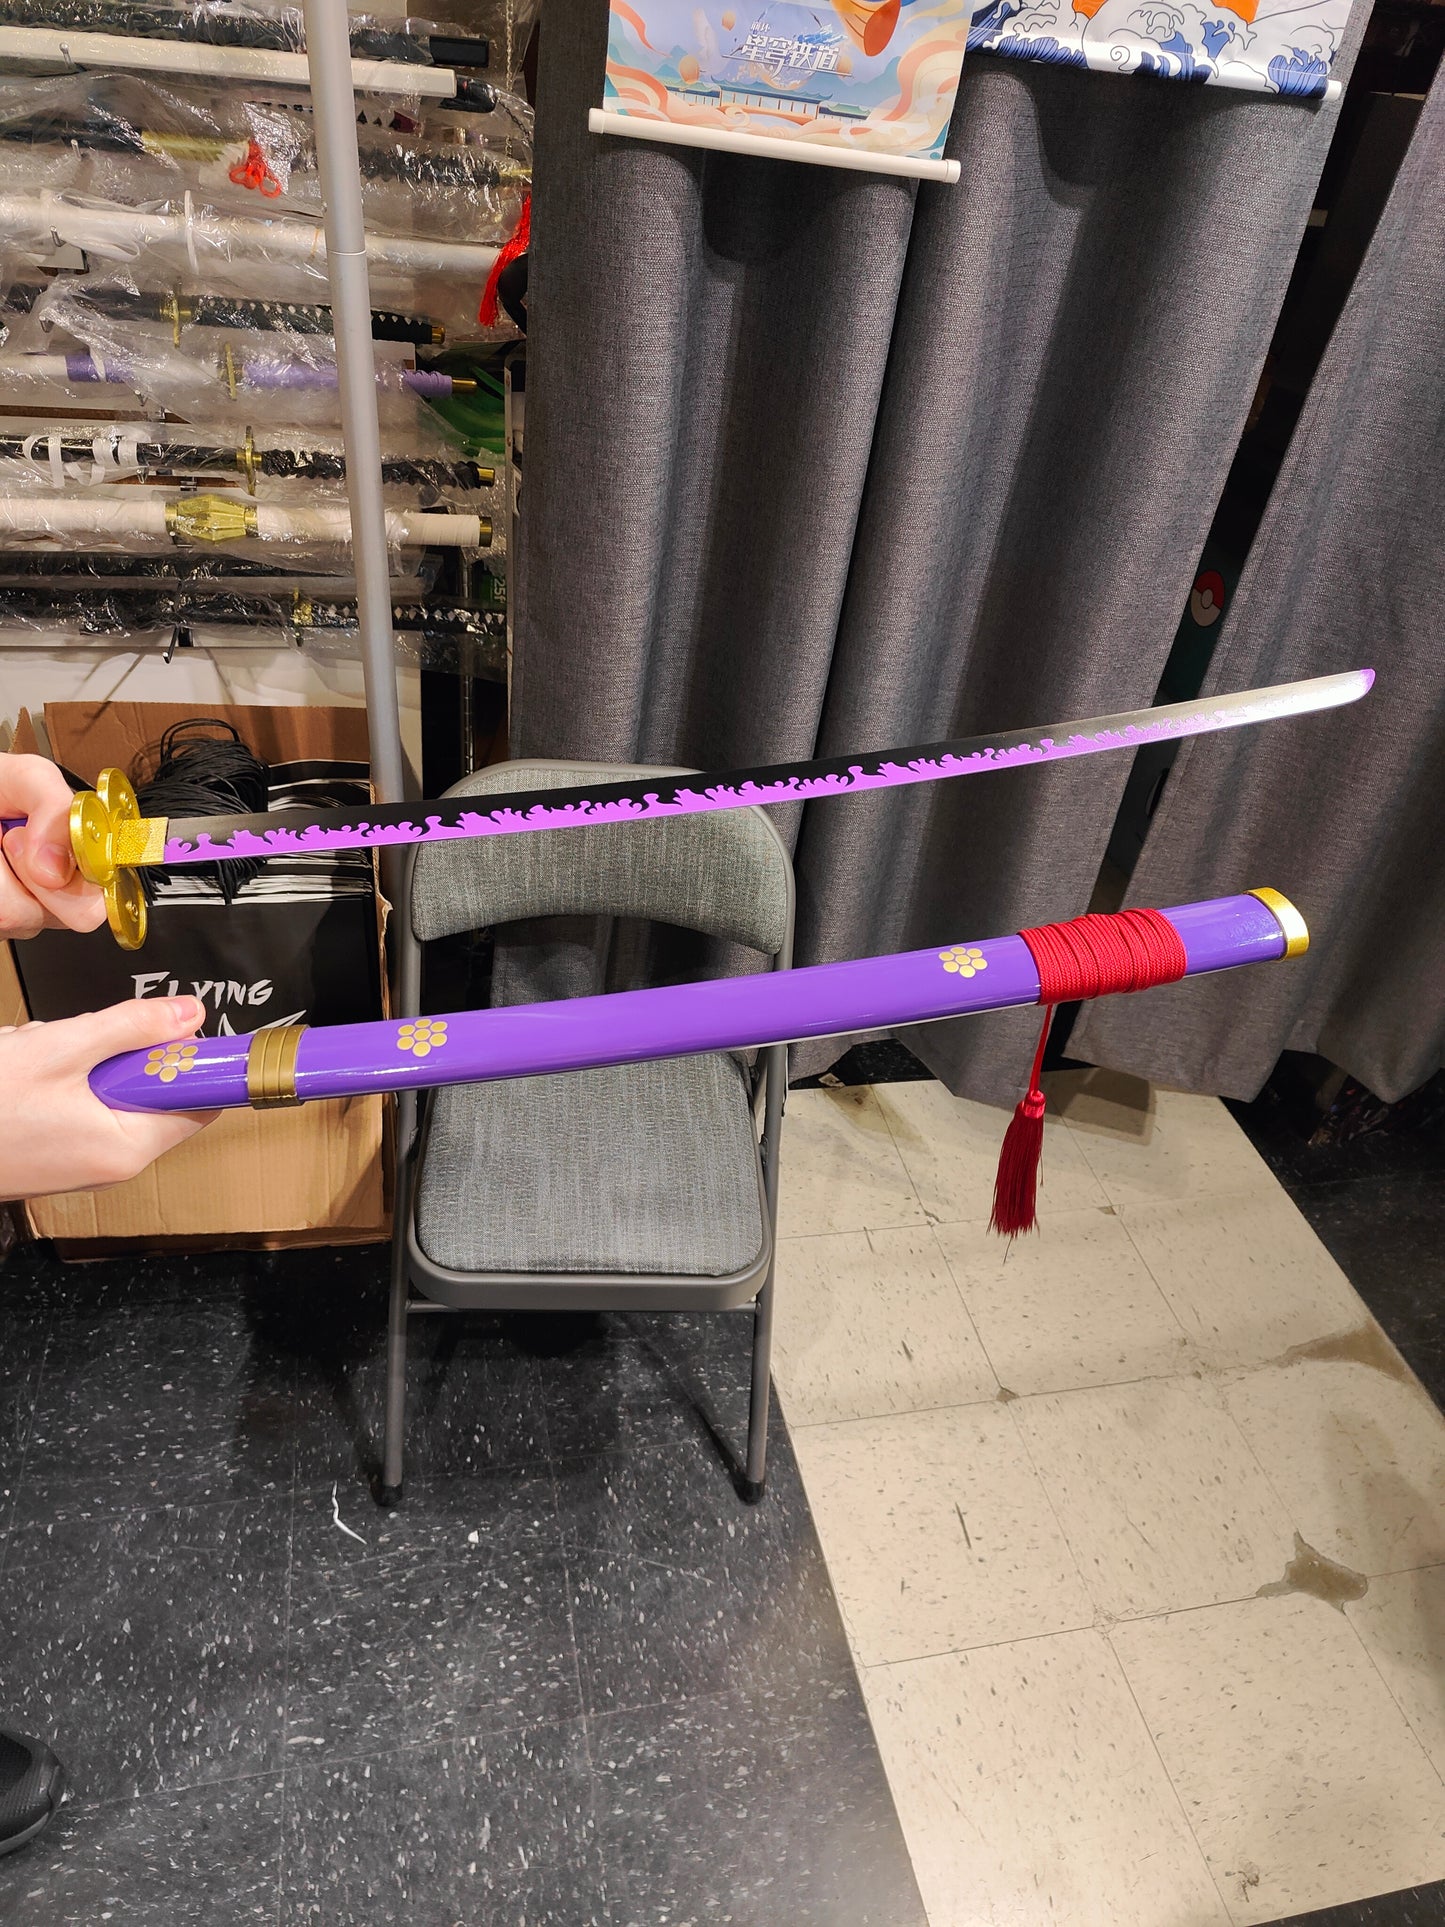 One Piece - Purple Enma Sword (Price Does Not Include Shipping)